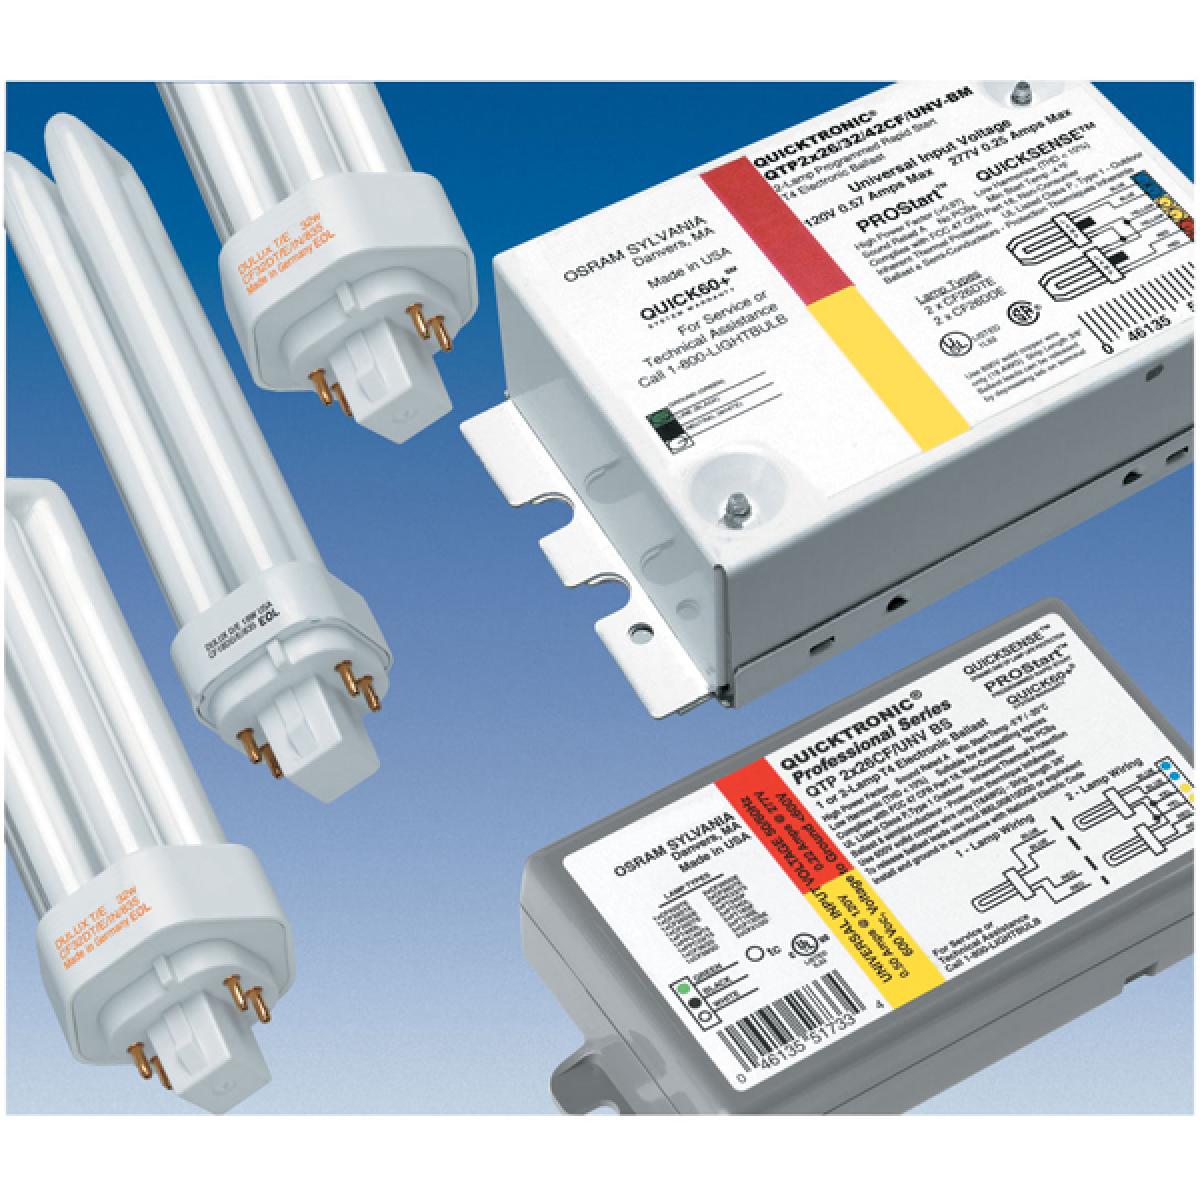 Satco S5235 QTP1/2CF/UNV/Dual Entry # of lamps: 2 CF26 Compact Fluorescent Programmed Start, < 10% THD, Universal Voltage Ballast